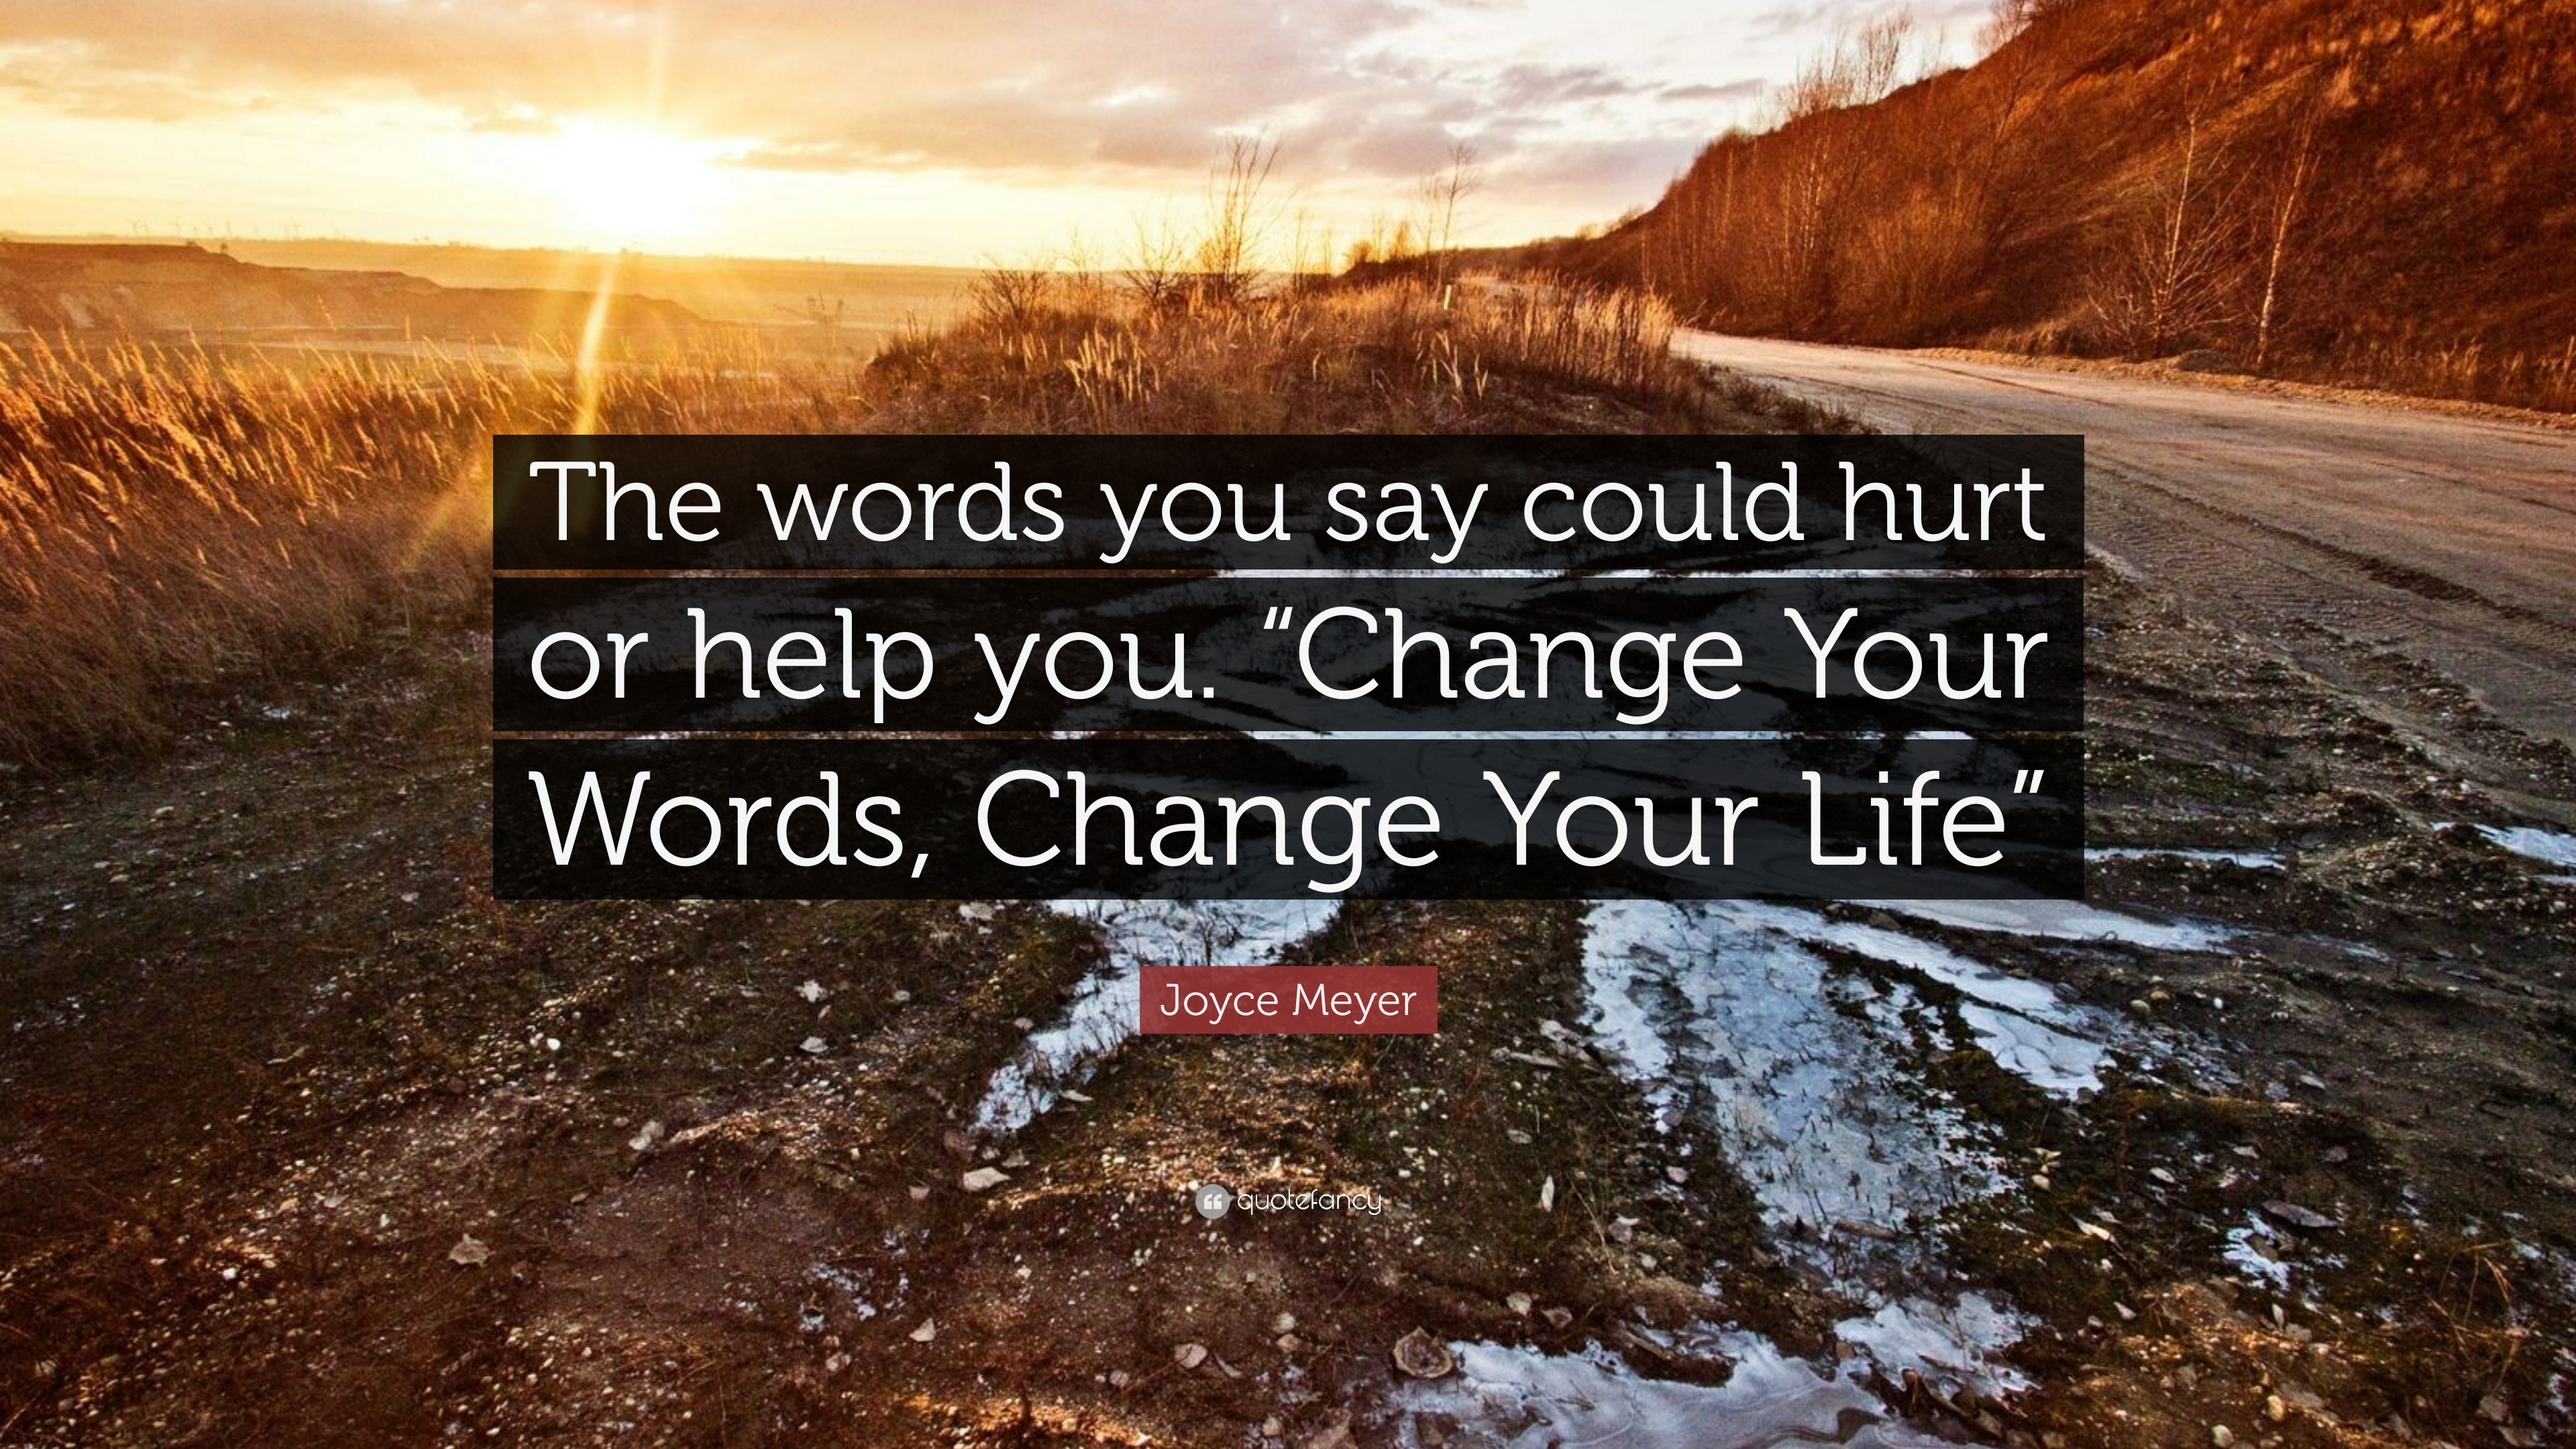 Joyce Meyer Quote “The words you say could hurt or help you “